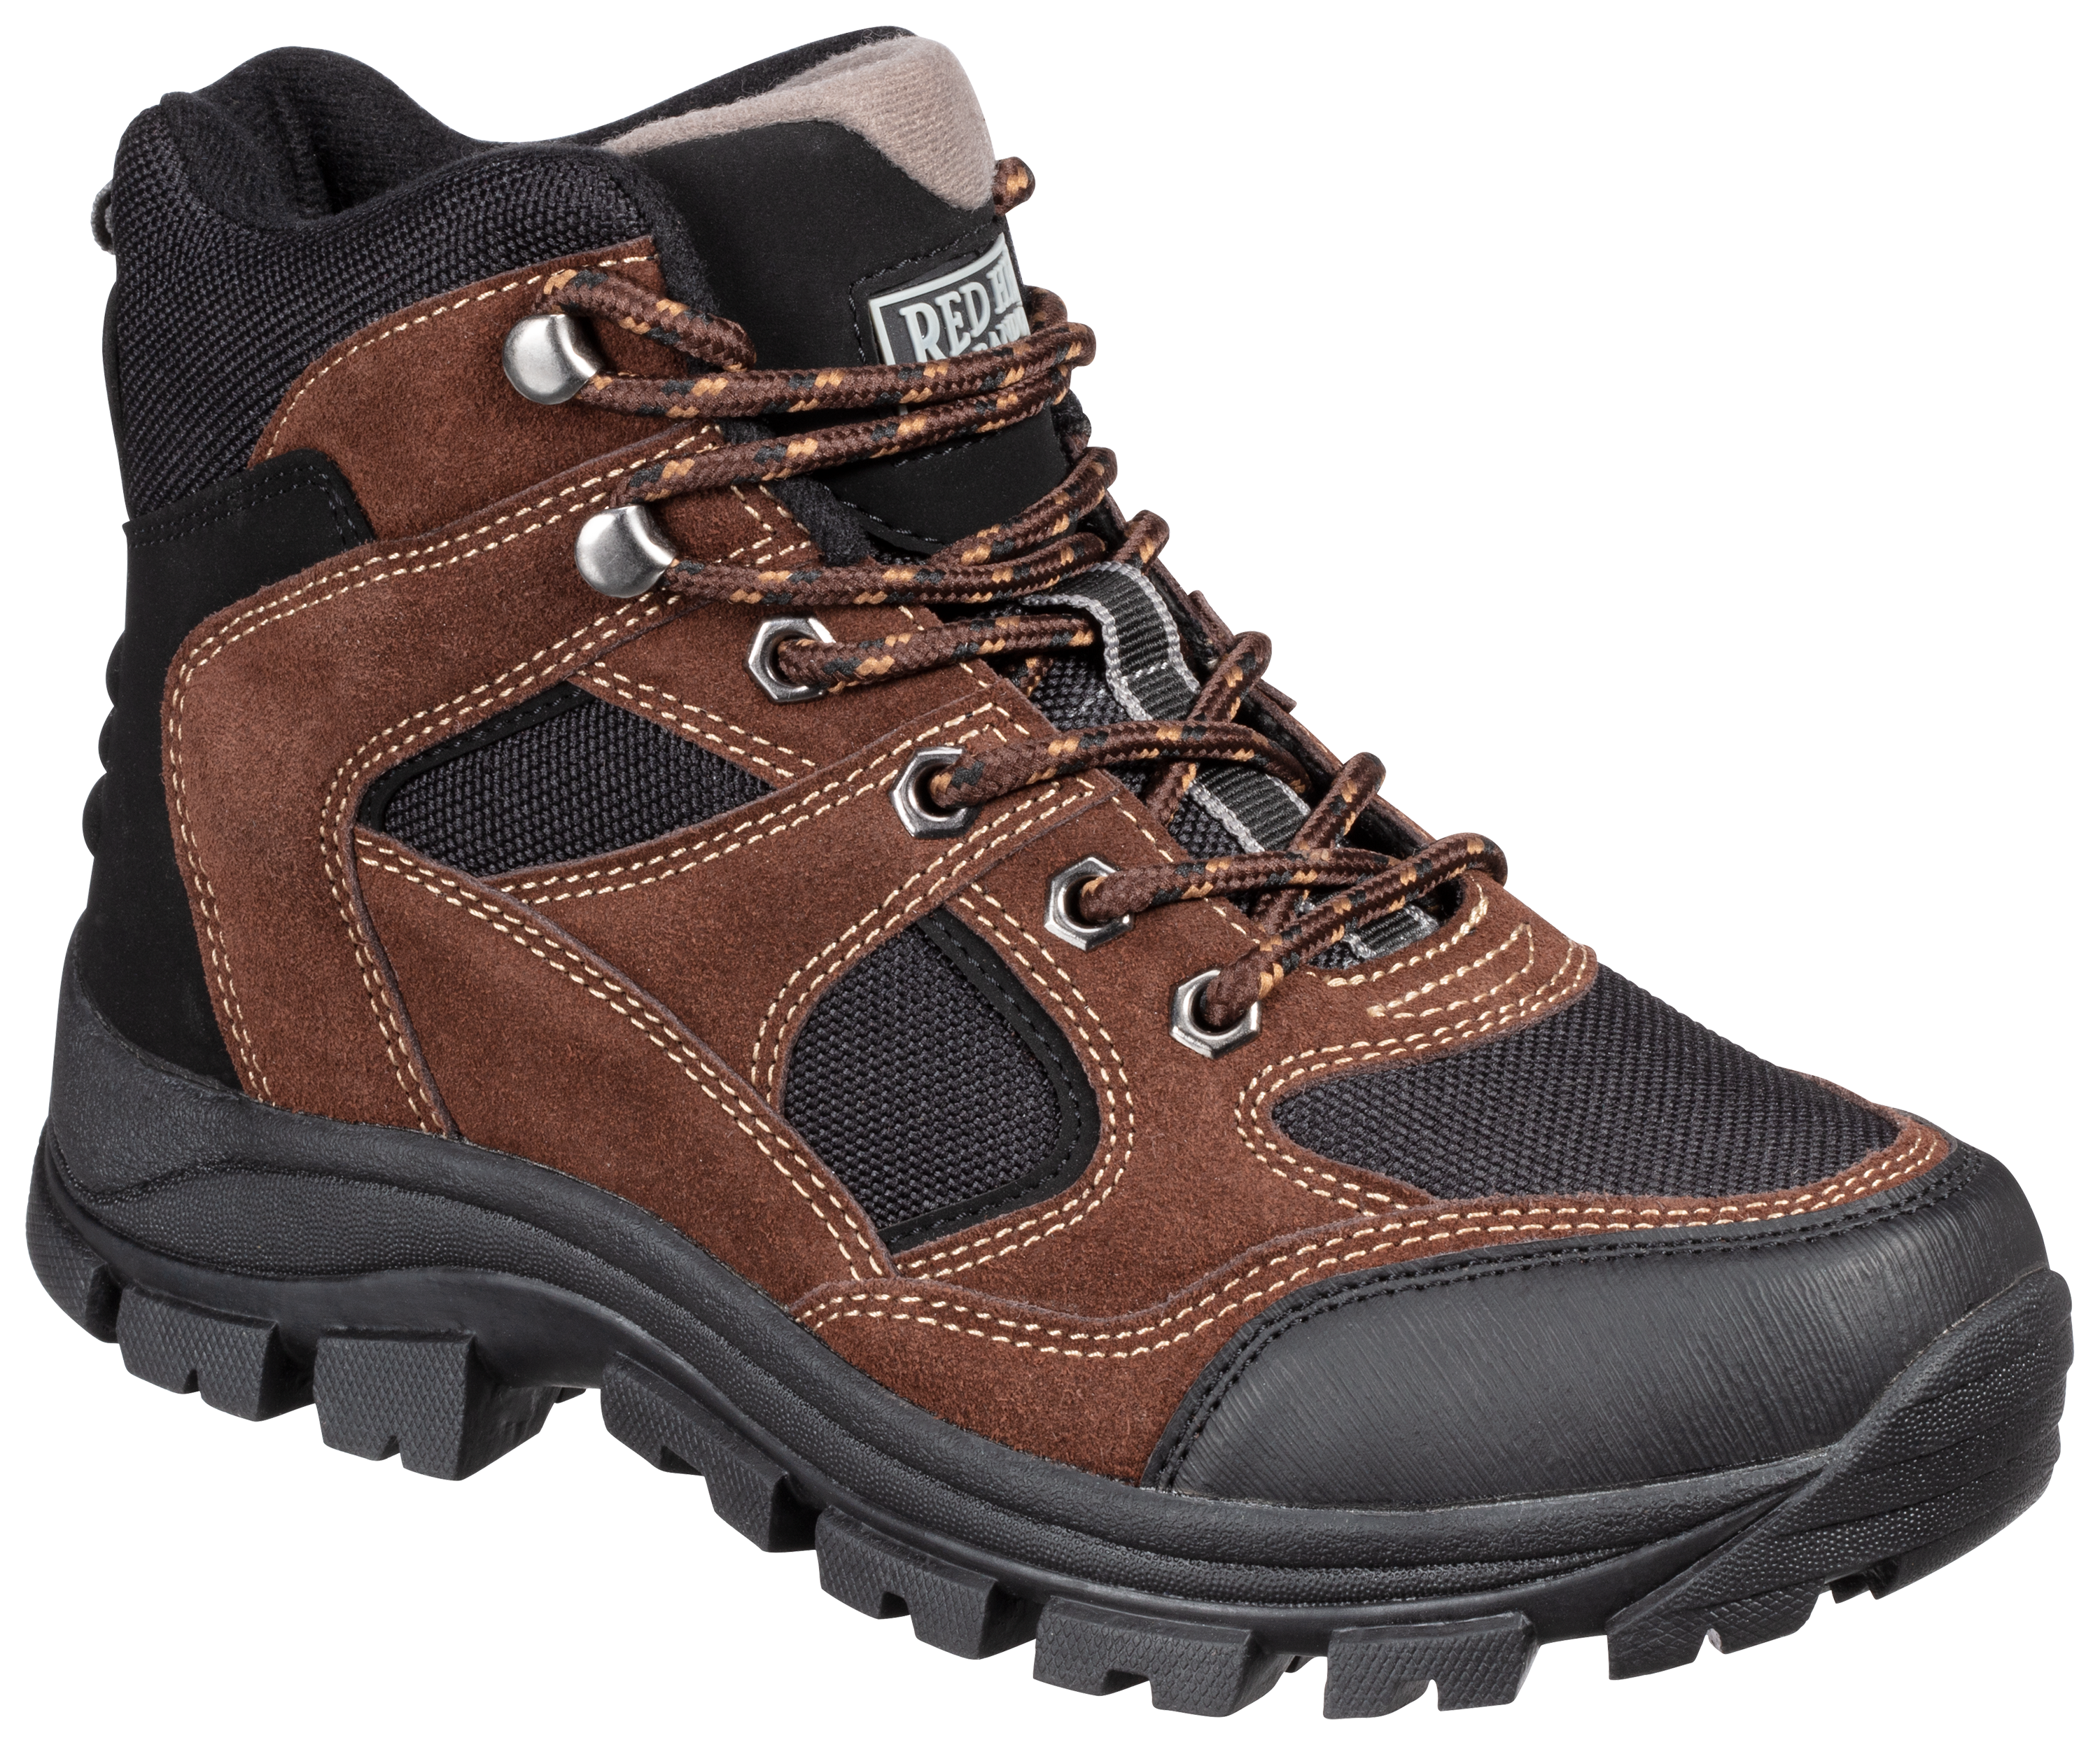 RedHead Everest III Hiking Boots for Ladies - Brown - 10M